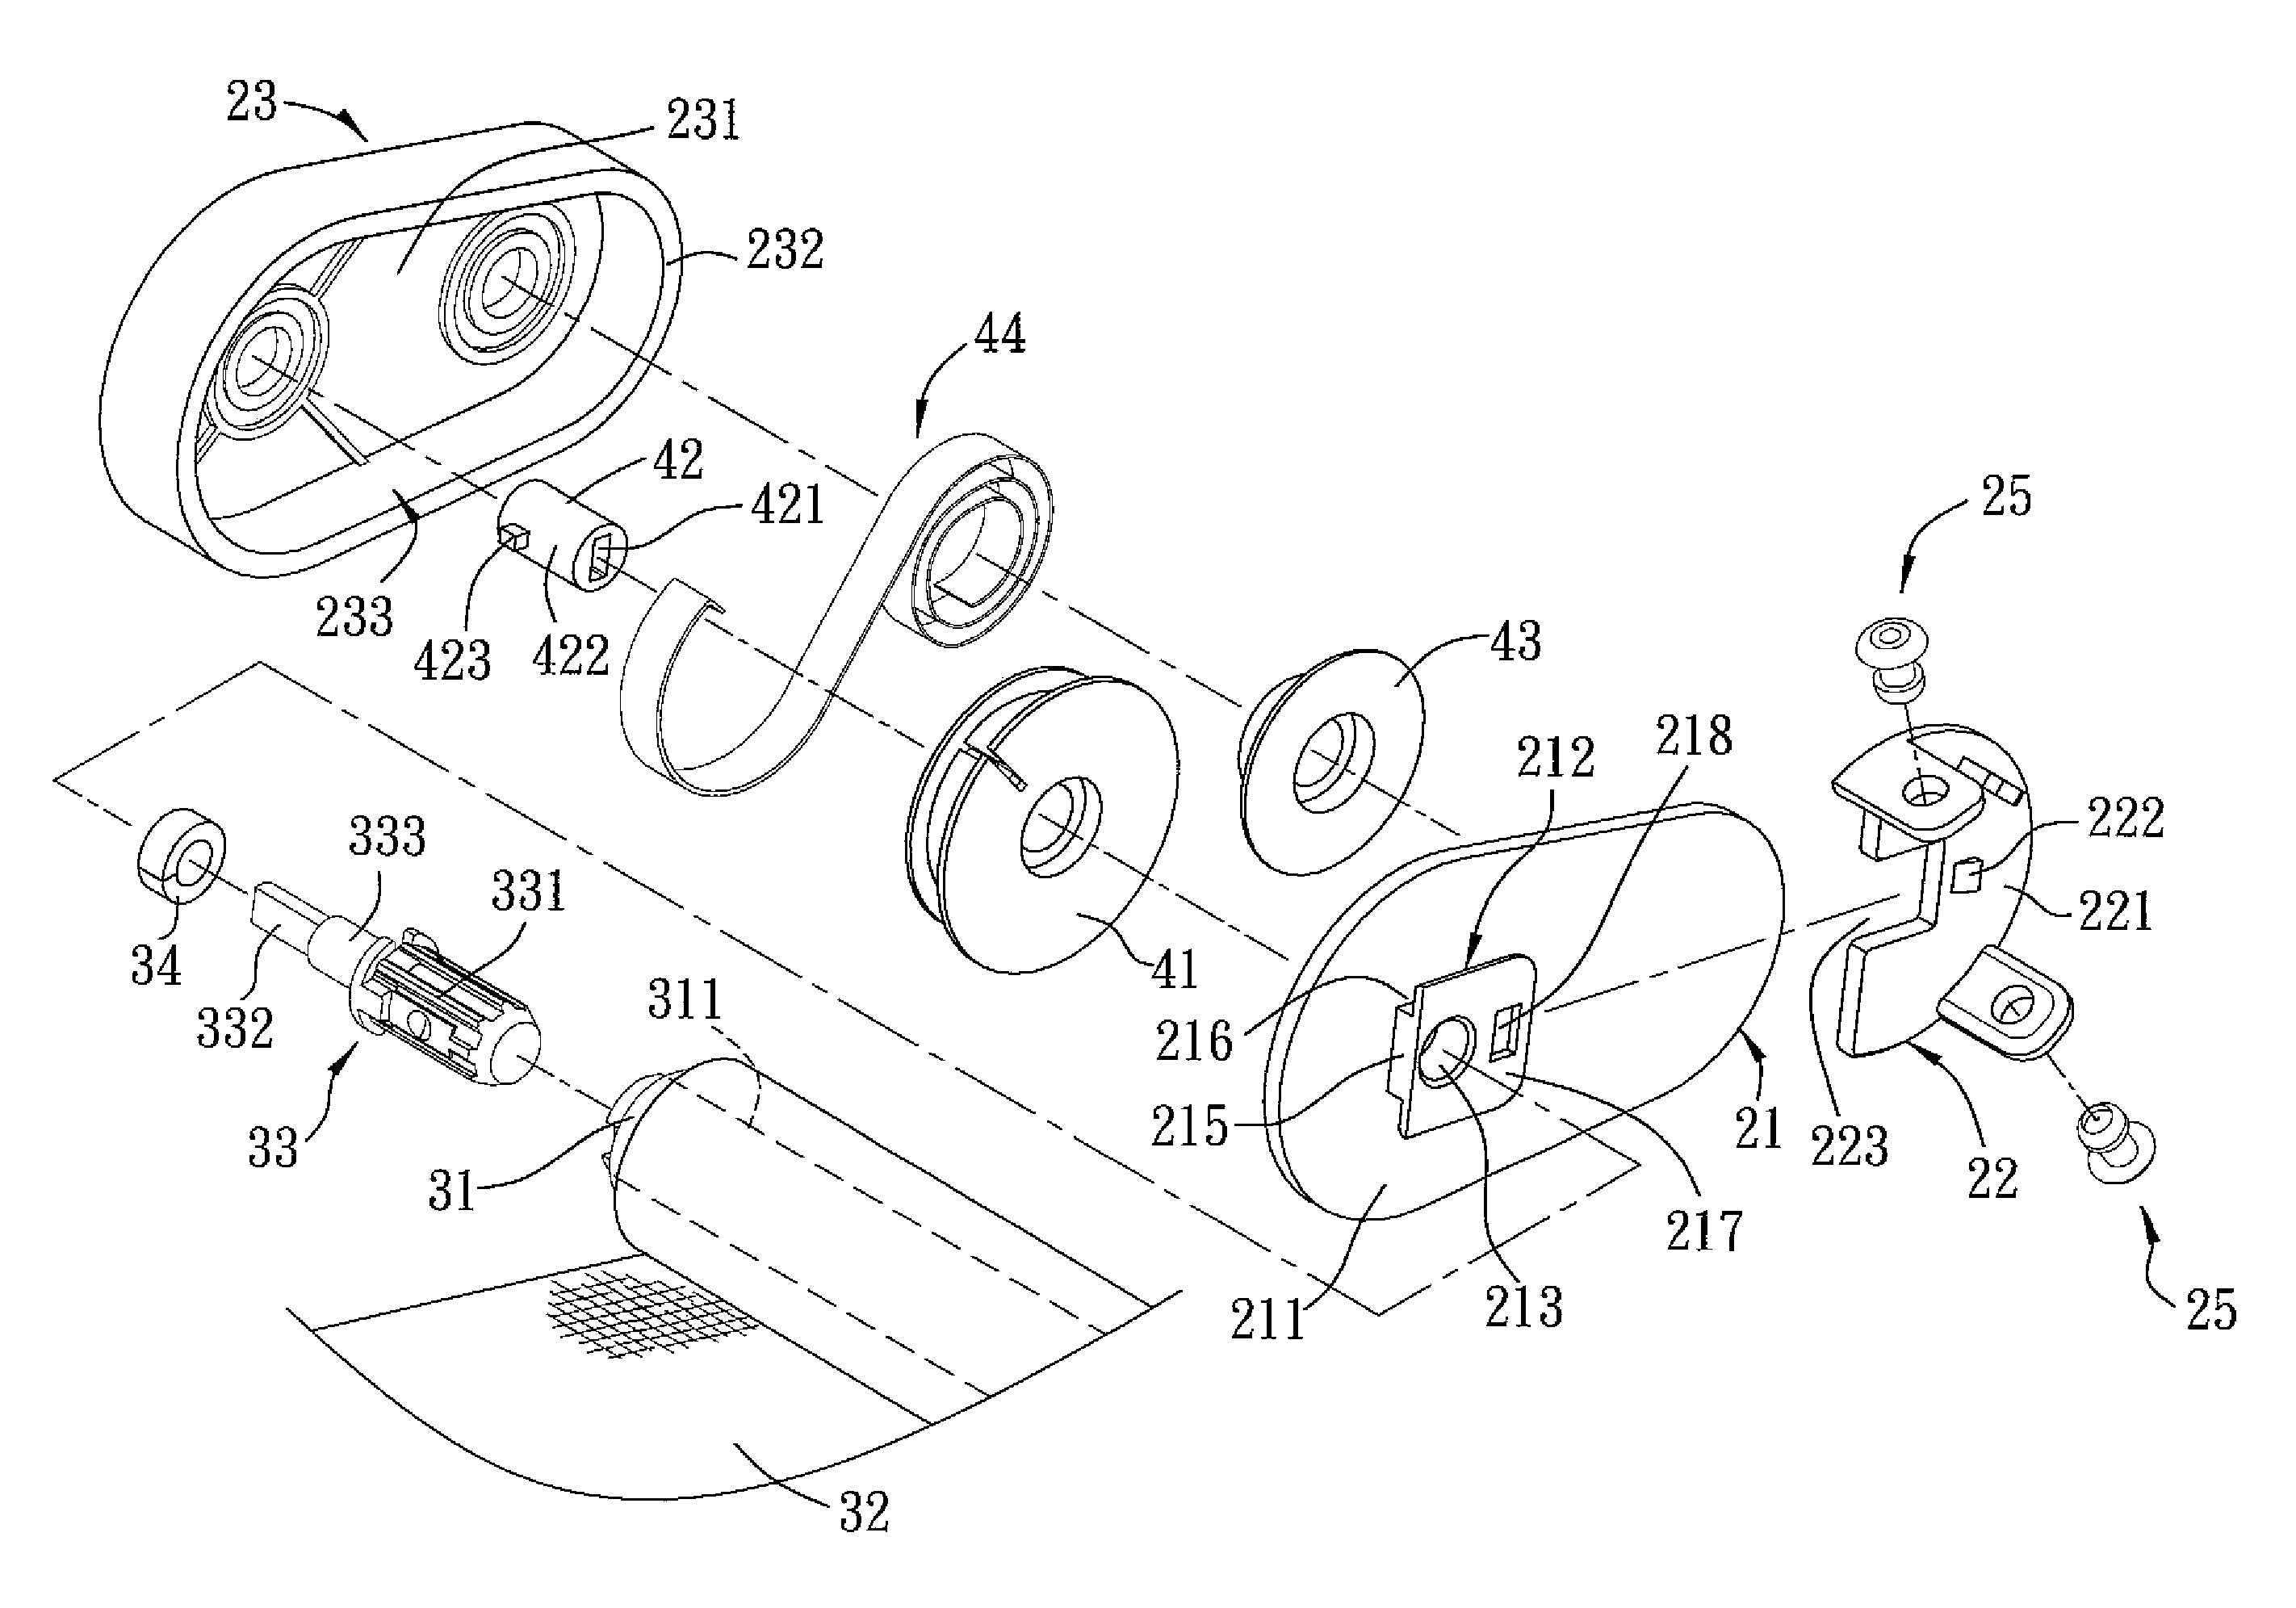 Window covering having a winding function